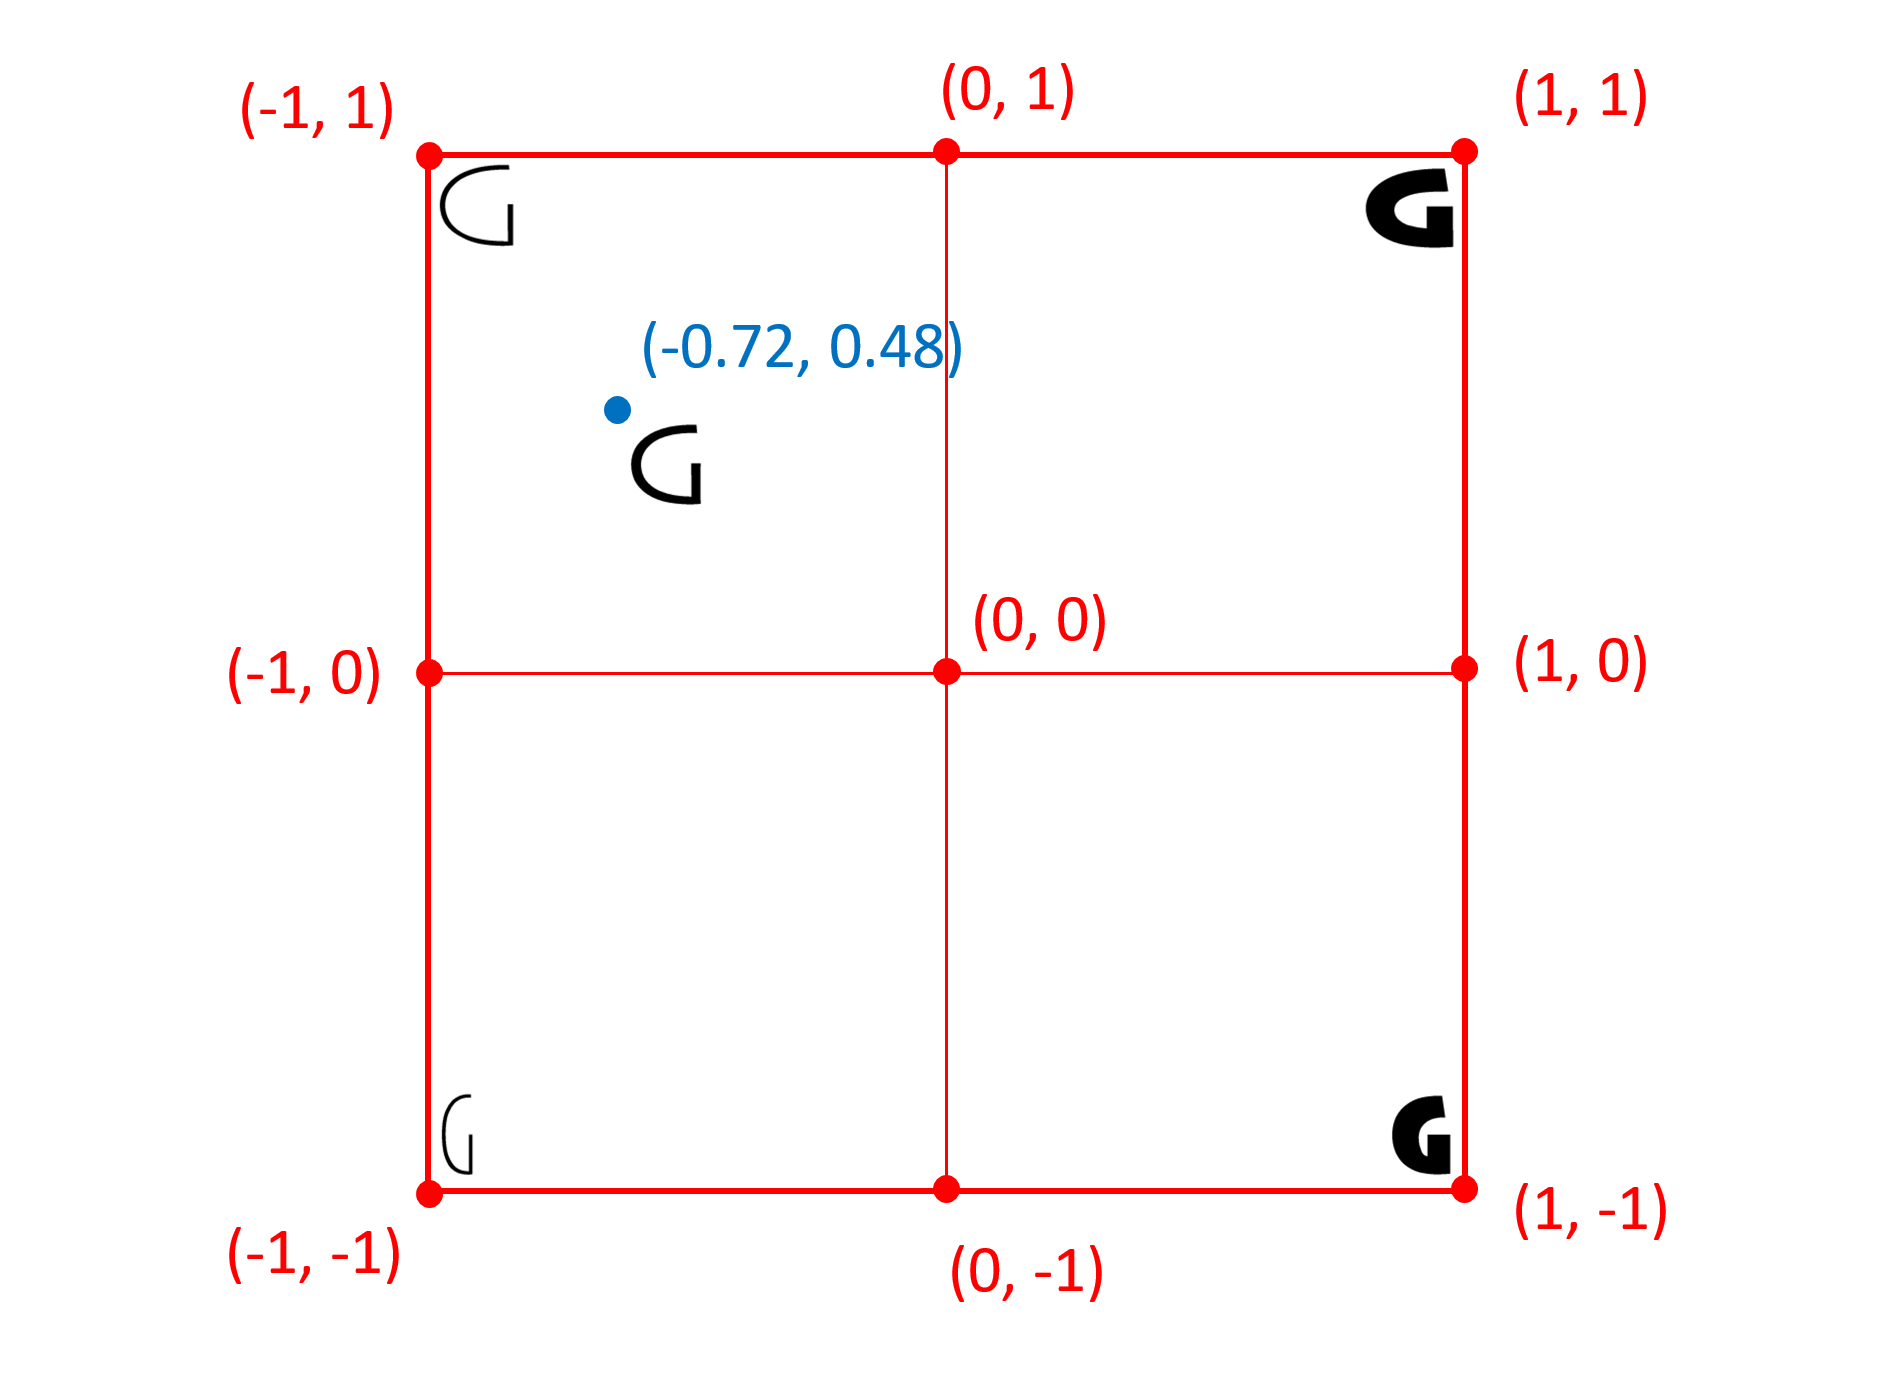 A two-dimensional coordinate space using normalized coordinates